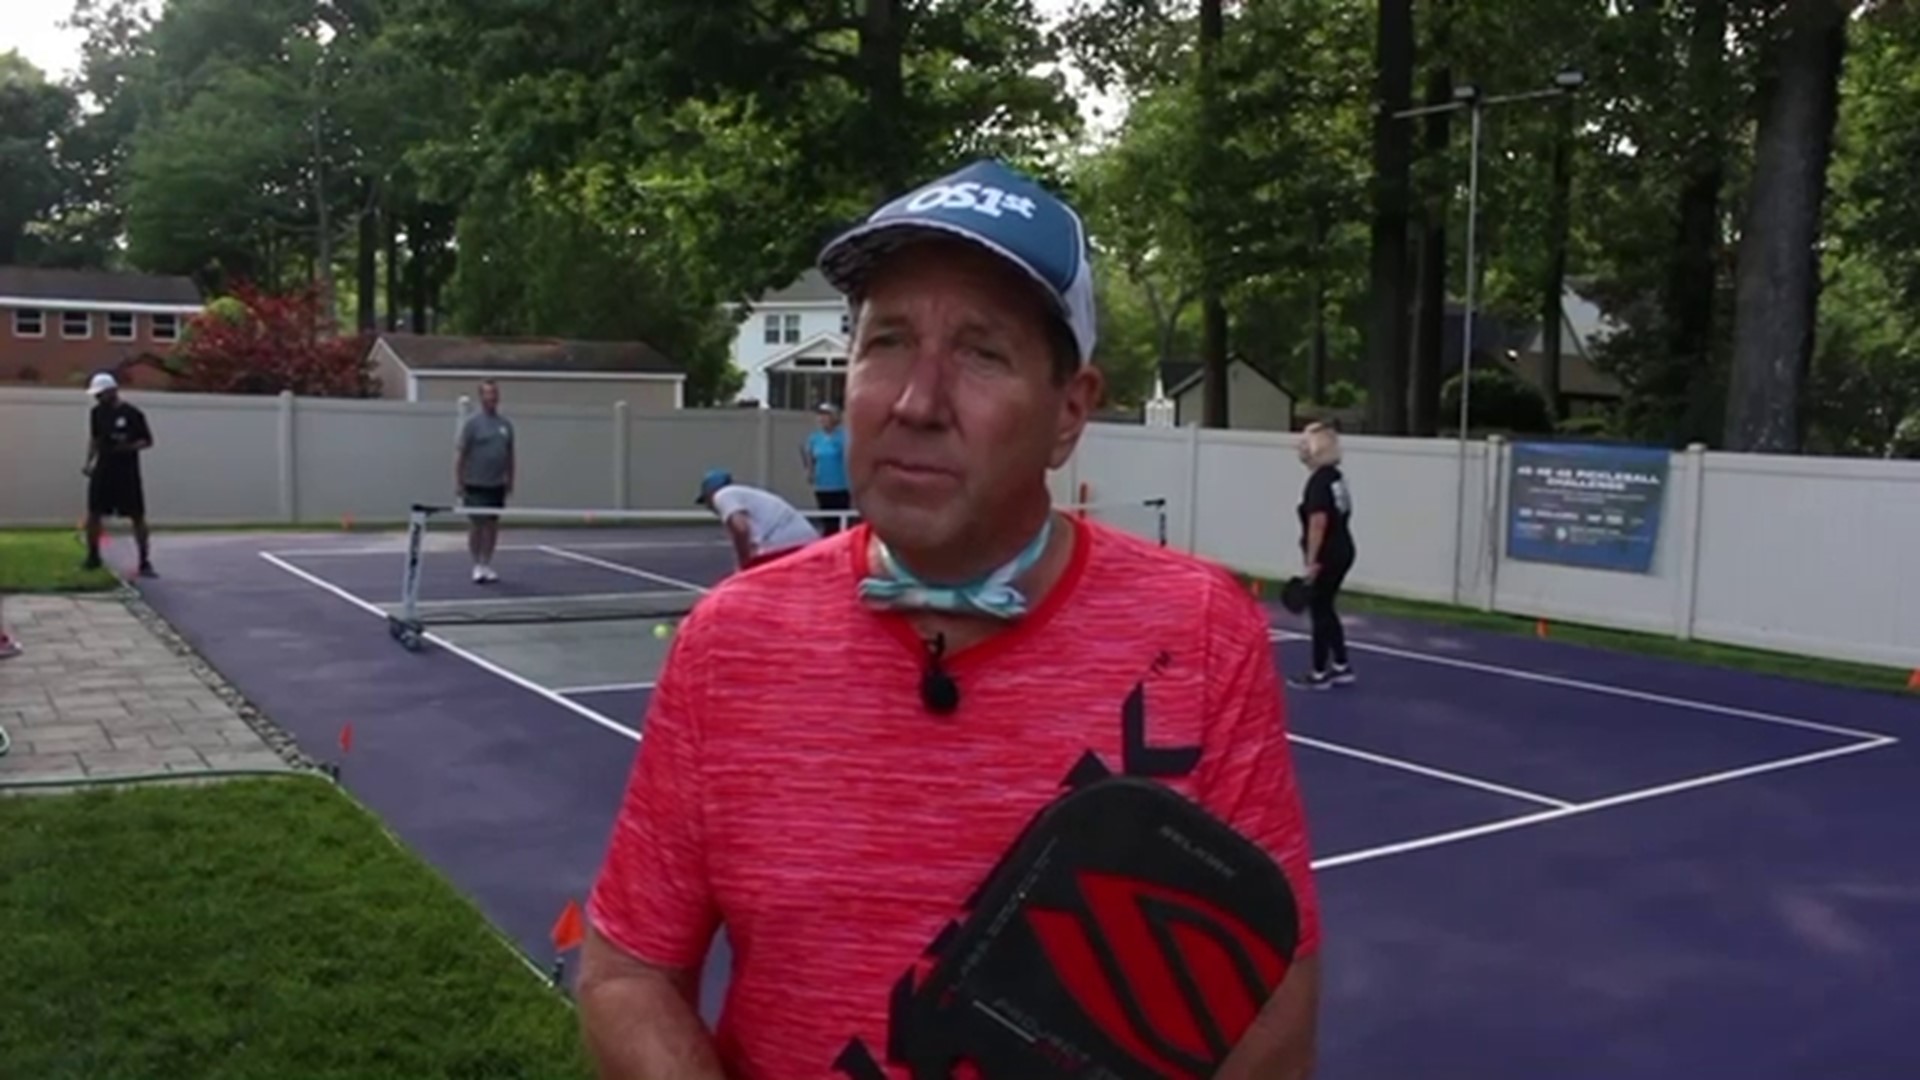 Dean Matt and his pickleball partner started their Guiness World Record attempt on May 1: play 48 matches in all 48 contiguous states in less than 48 days.